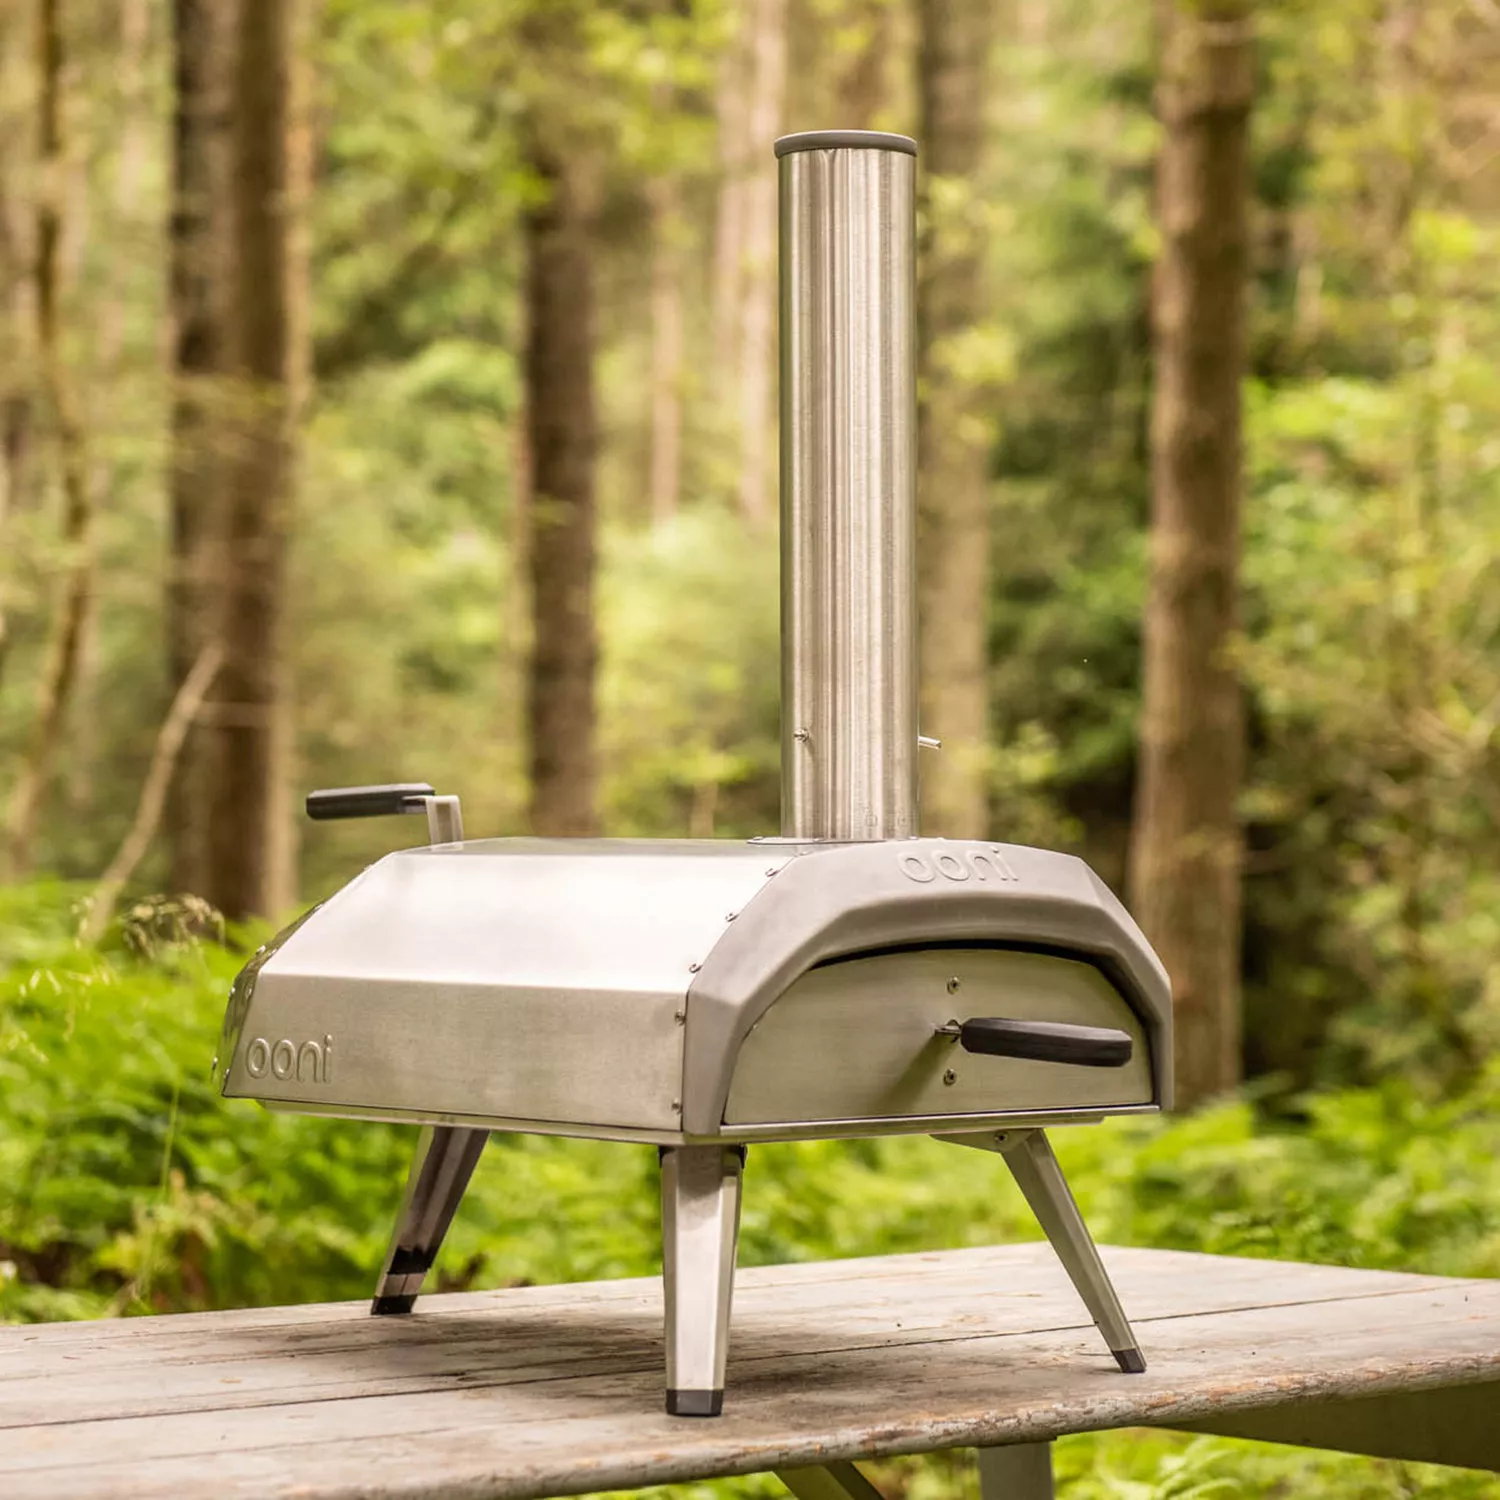 NEW - Ooni Karu 12 Wood and Charcoal-Fired Portable Pizza Oven (Free  Shipping)